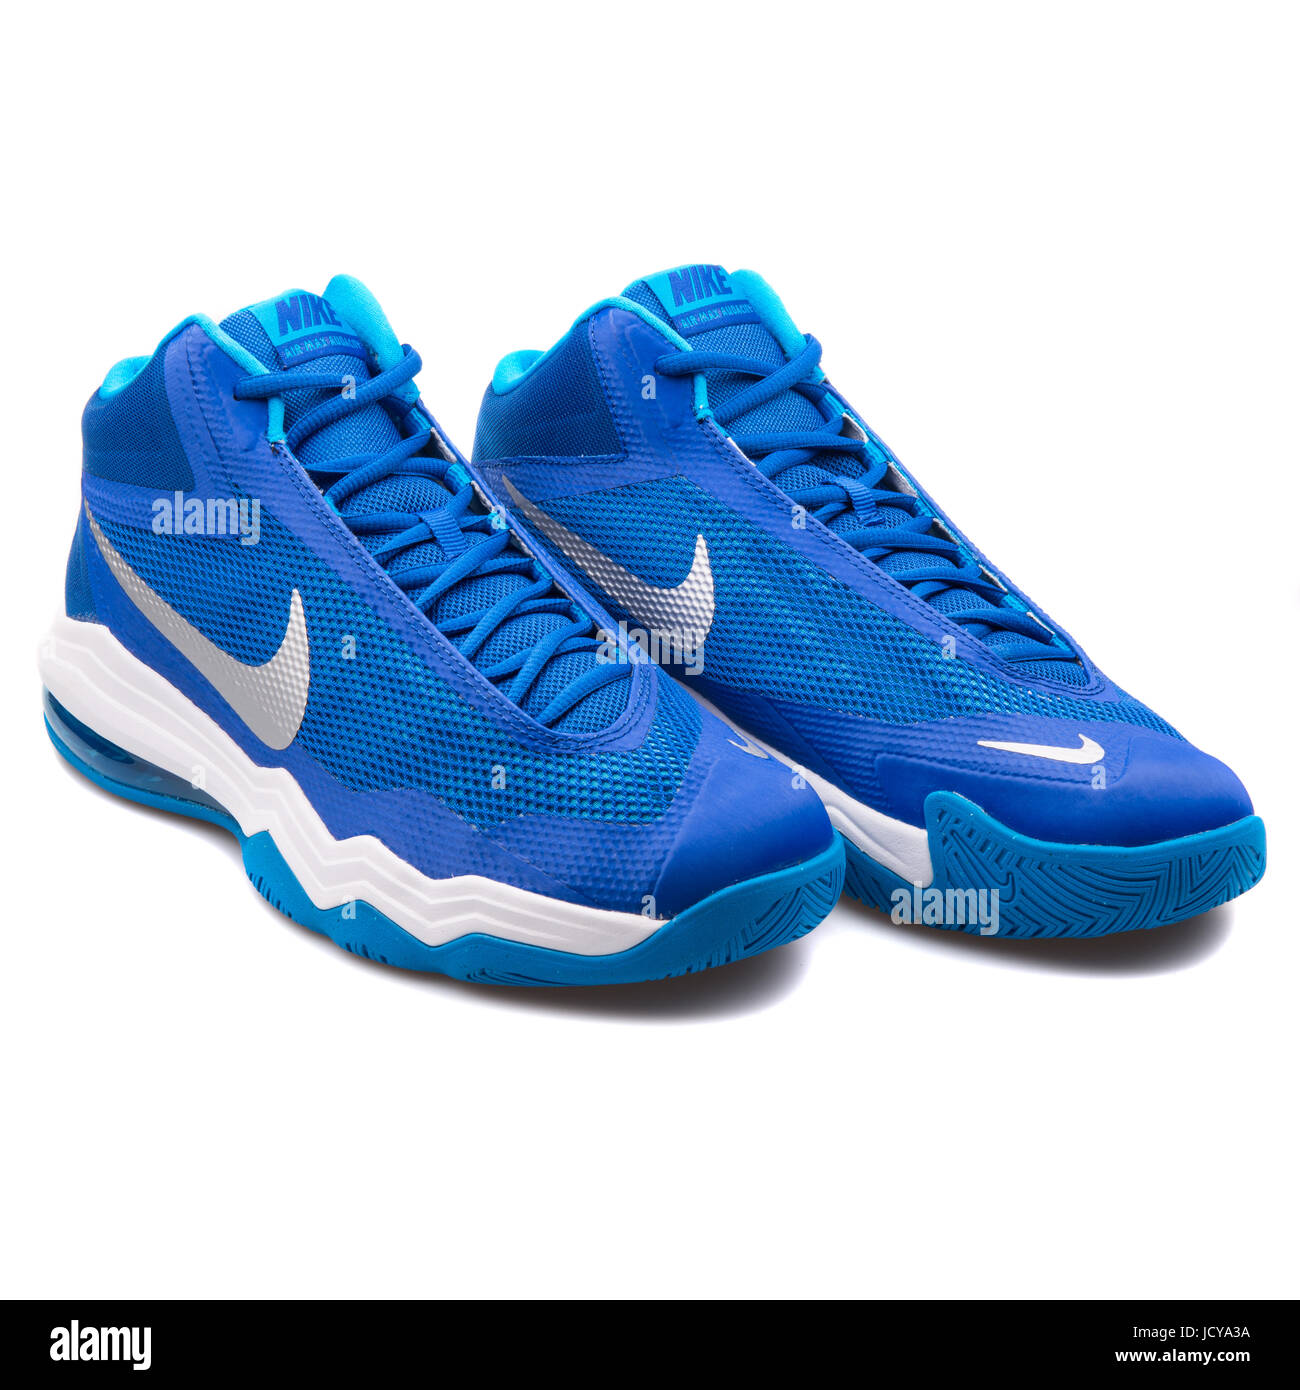 Nike Air Max Audacity TB Blue and White Unisex Basketball Shoes -  749166-403 Stock Photo - Alamy